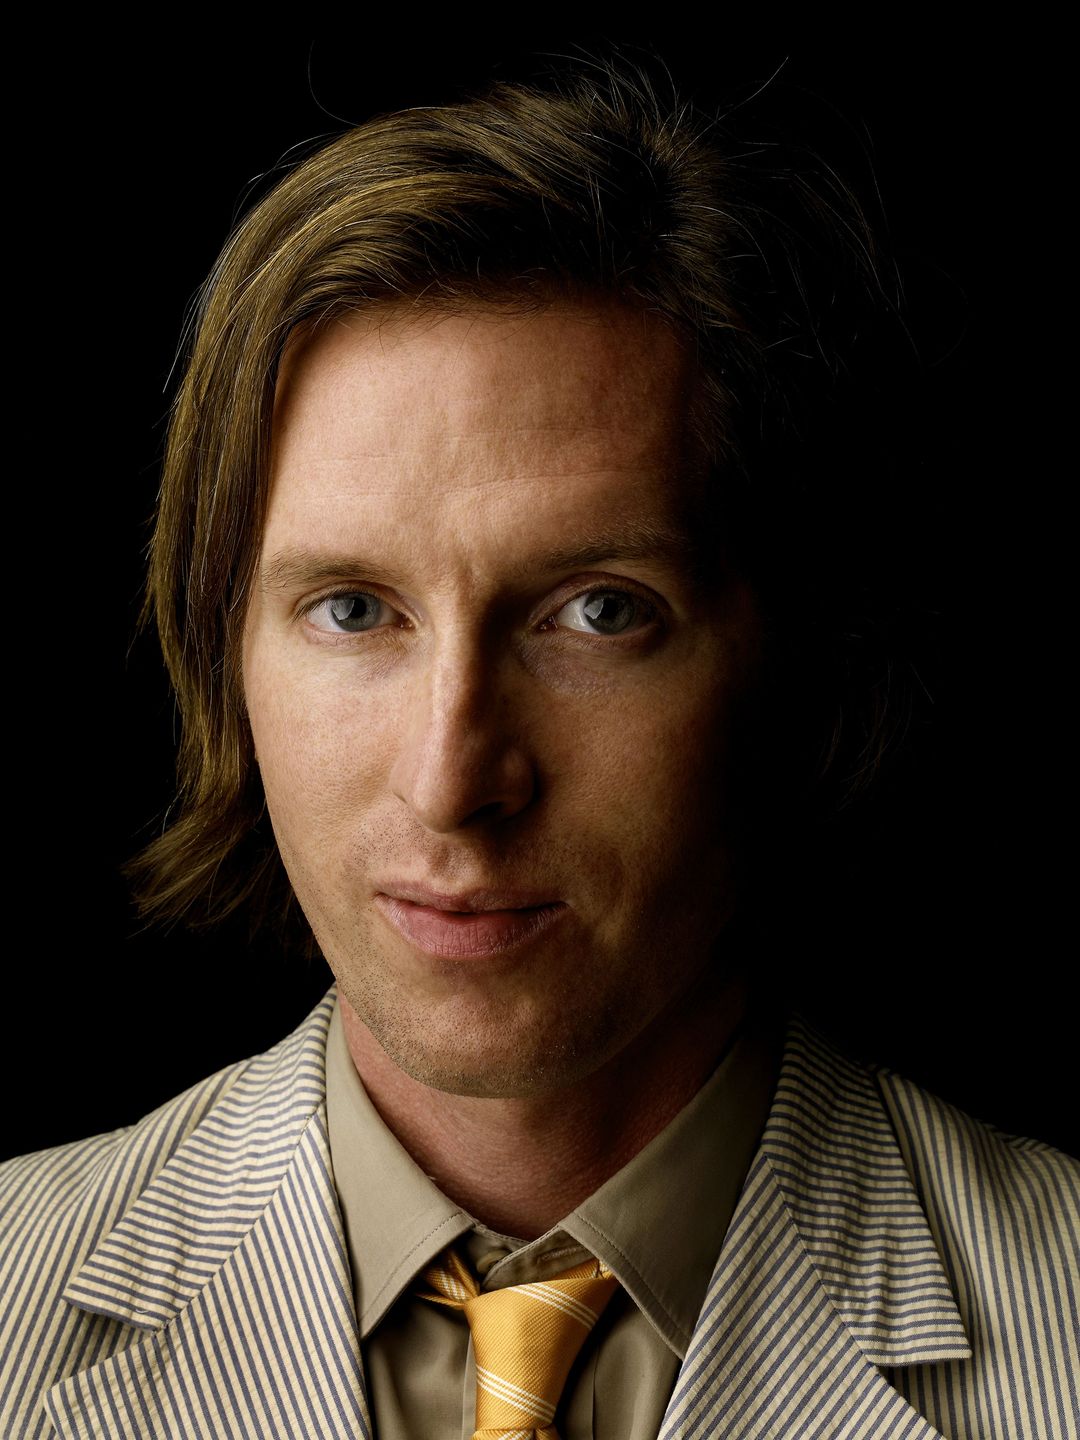 Wes Anderson early career